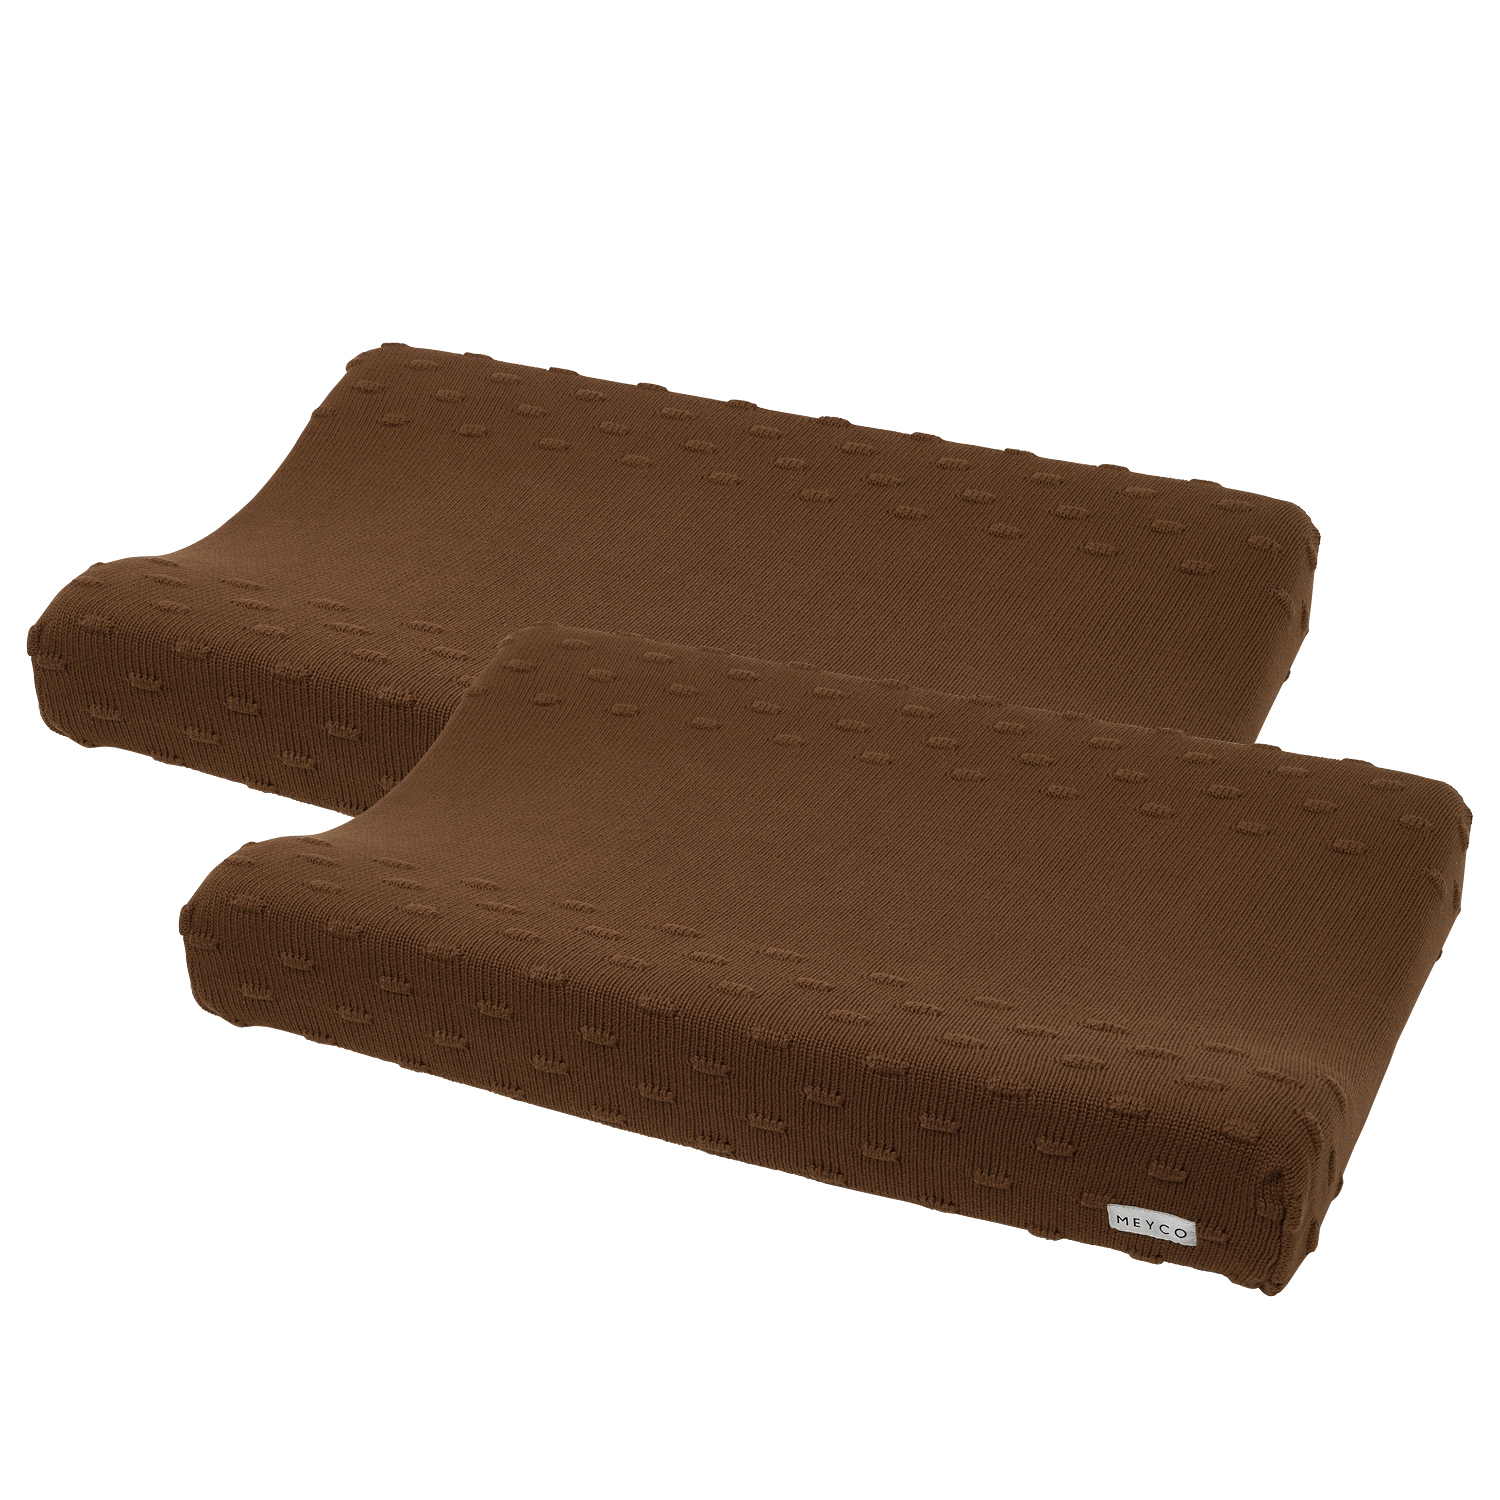 Changing mat cover 2-pack Knots - chocolate - 50x70cm